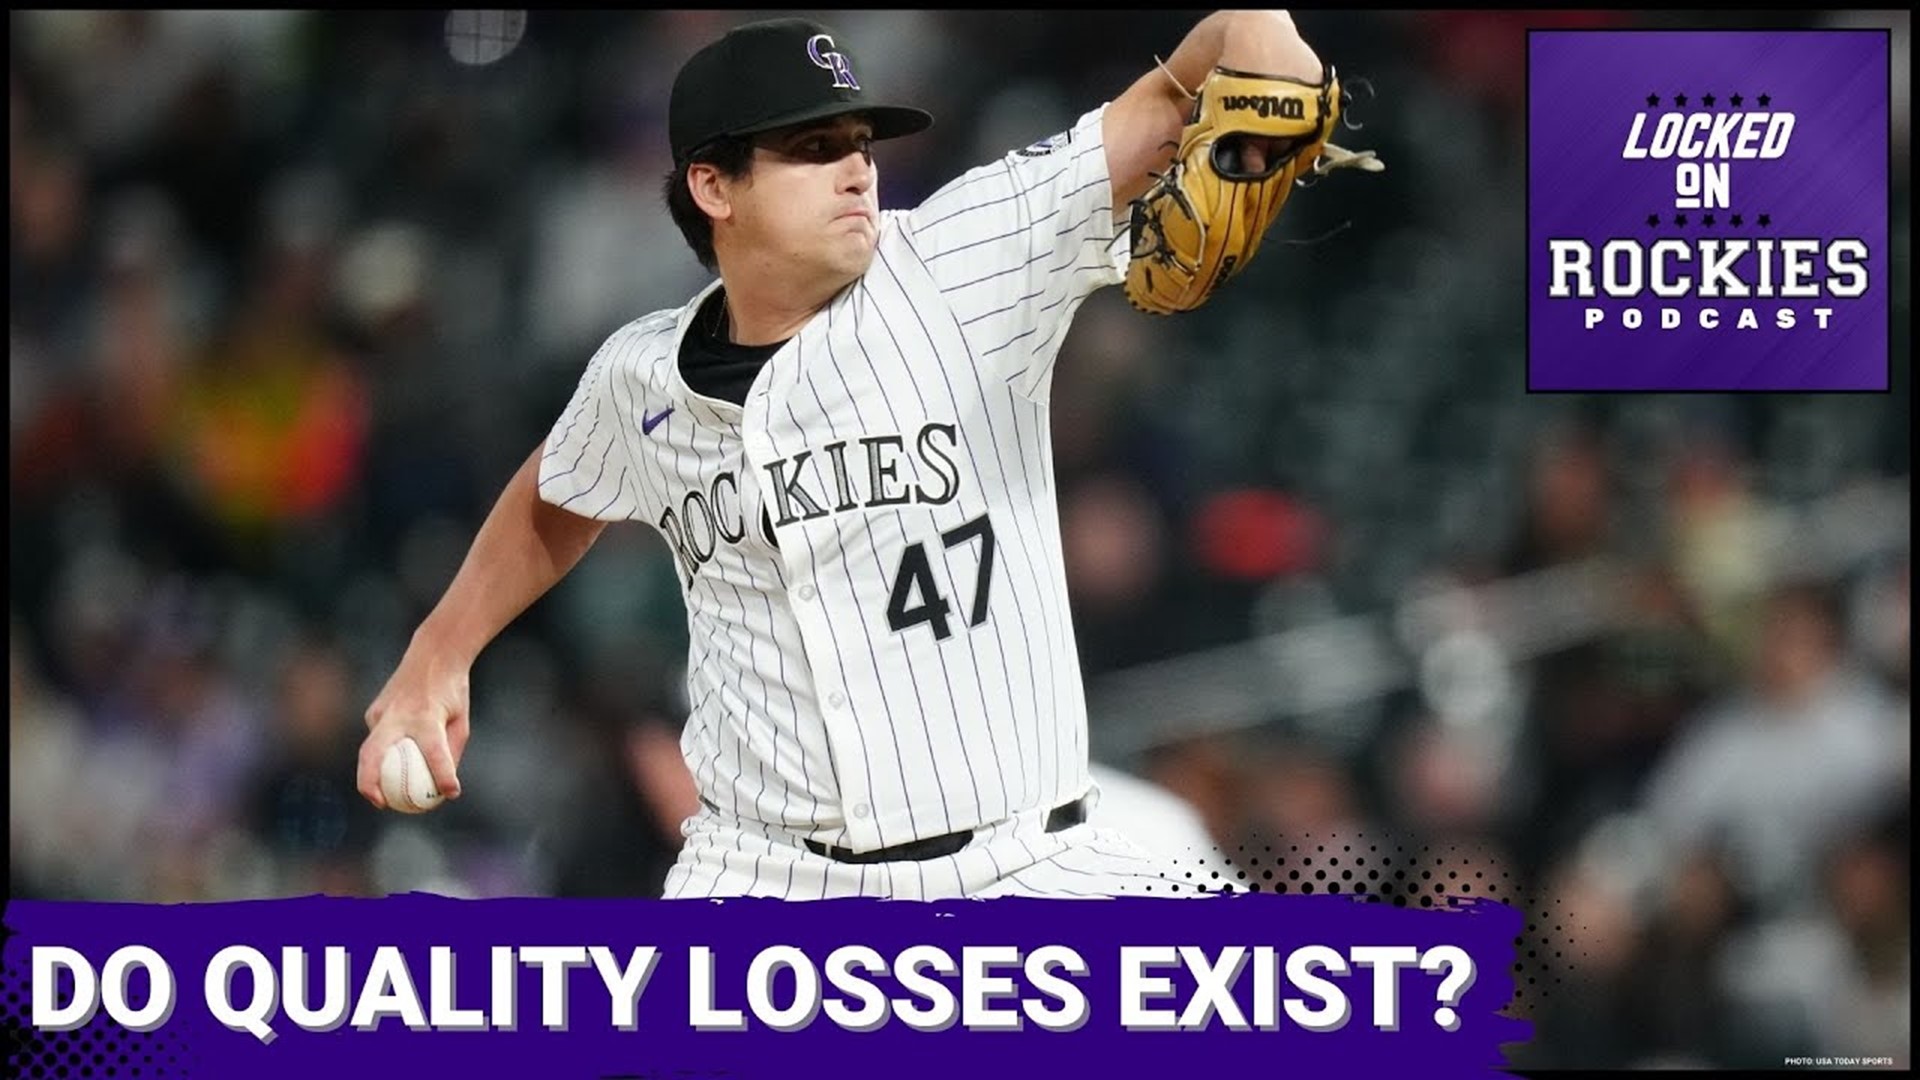 The Colorado Rockies lost last night but in terms of frustrating losses this season, last night was pretty mild.